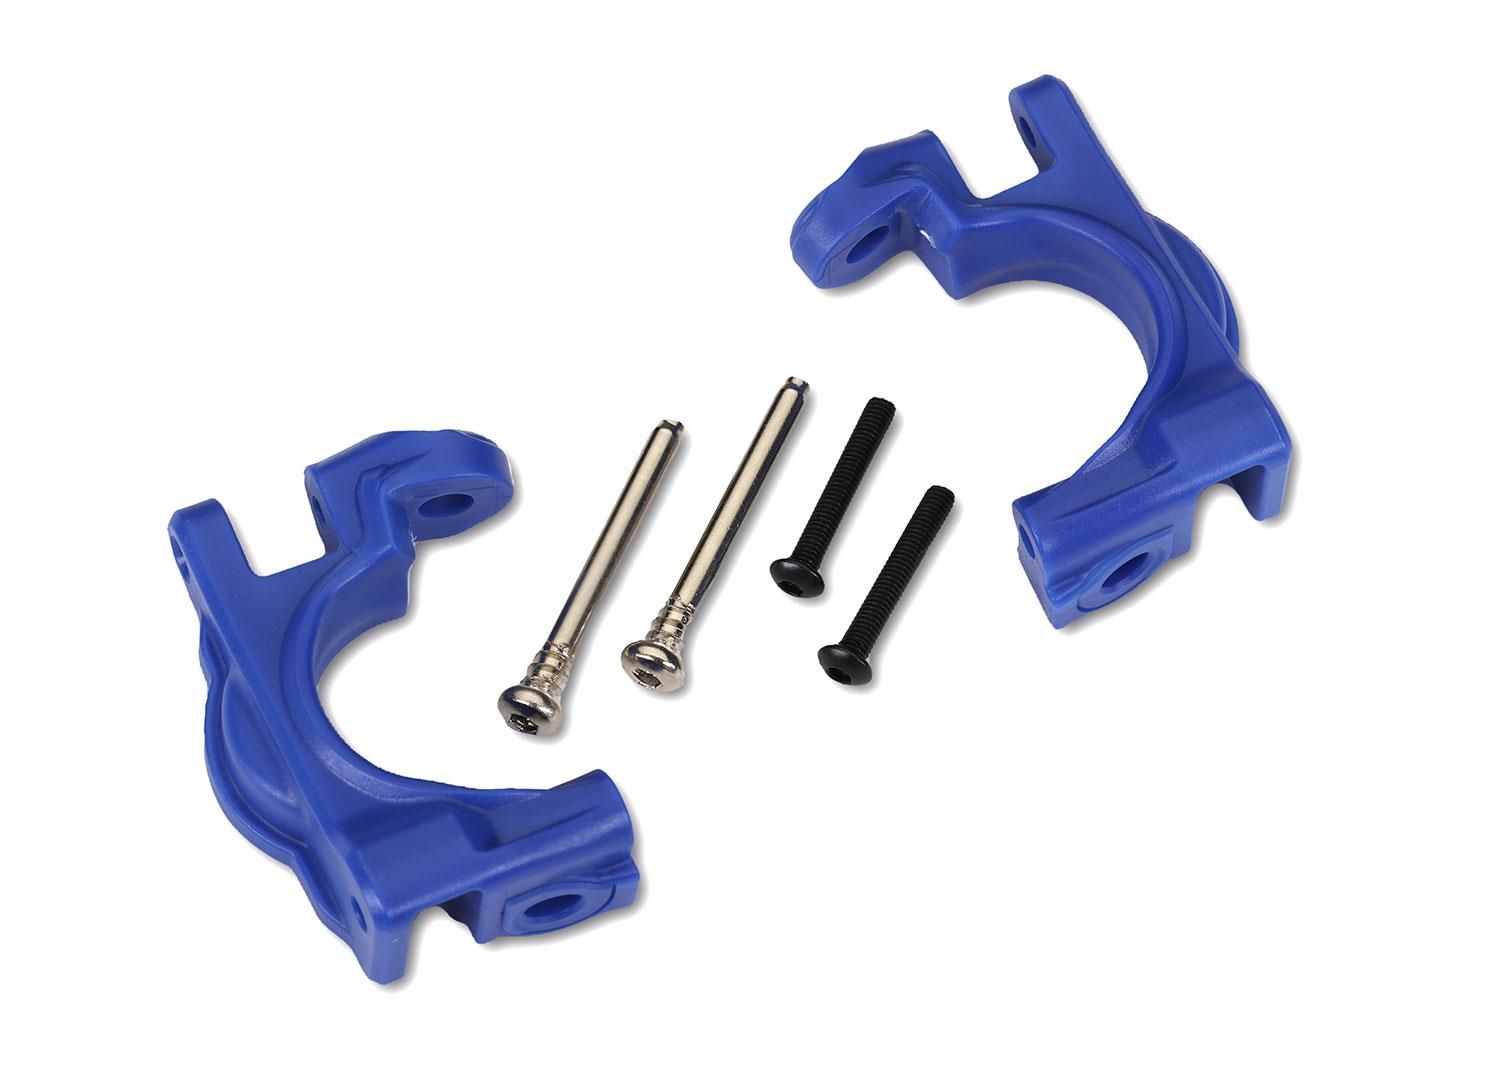 Traxxas - Caster Blocks Left/Right (for use with #9080 upgrade kit) - Blue (TRX-9032X)